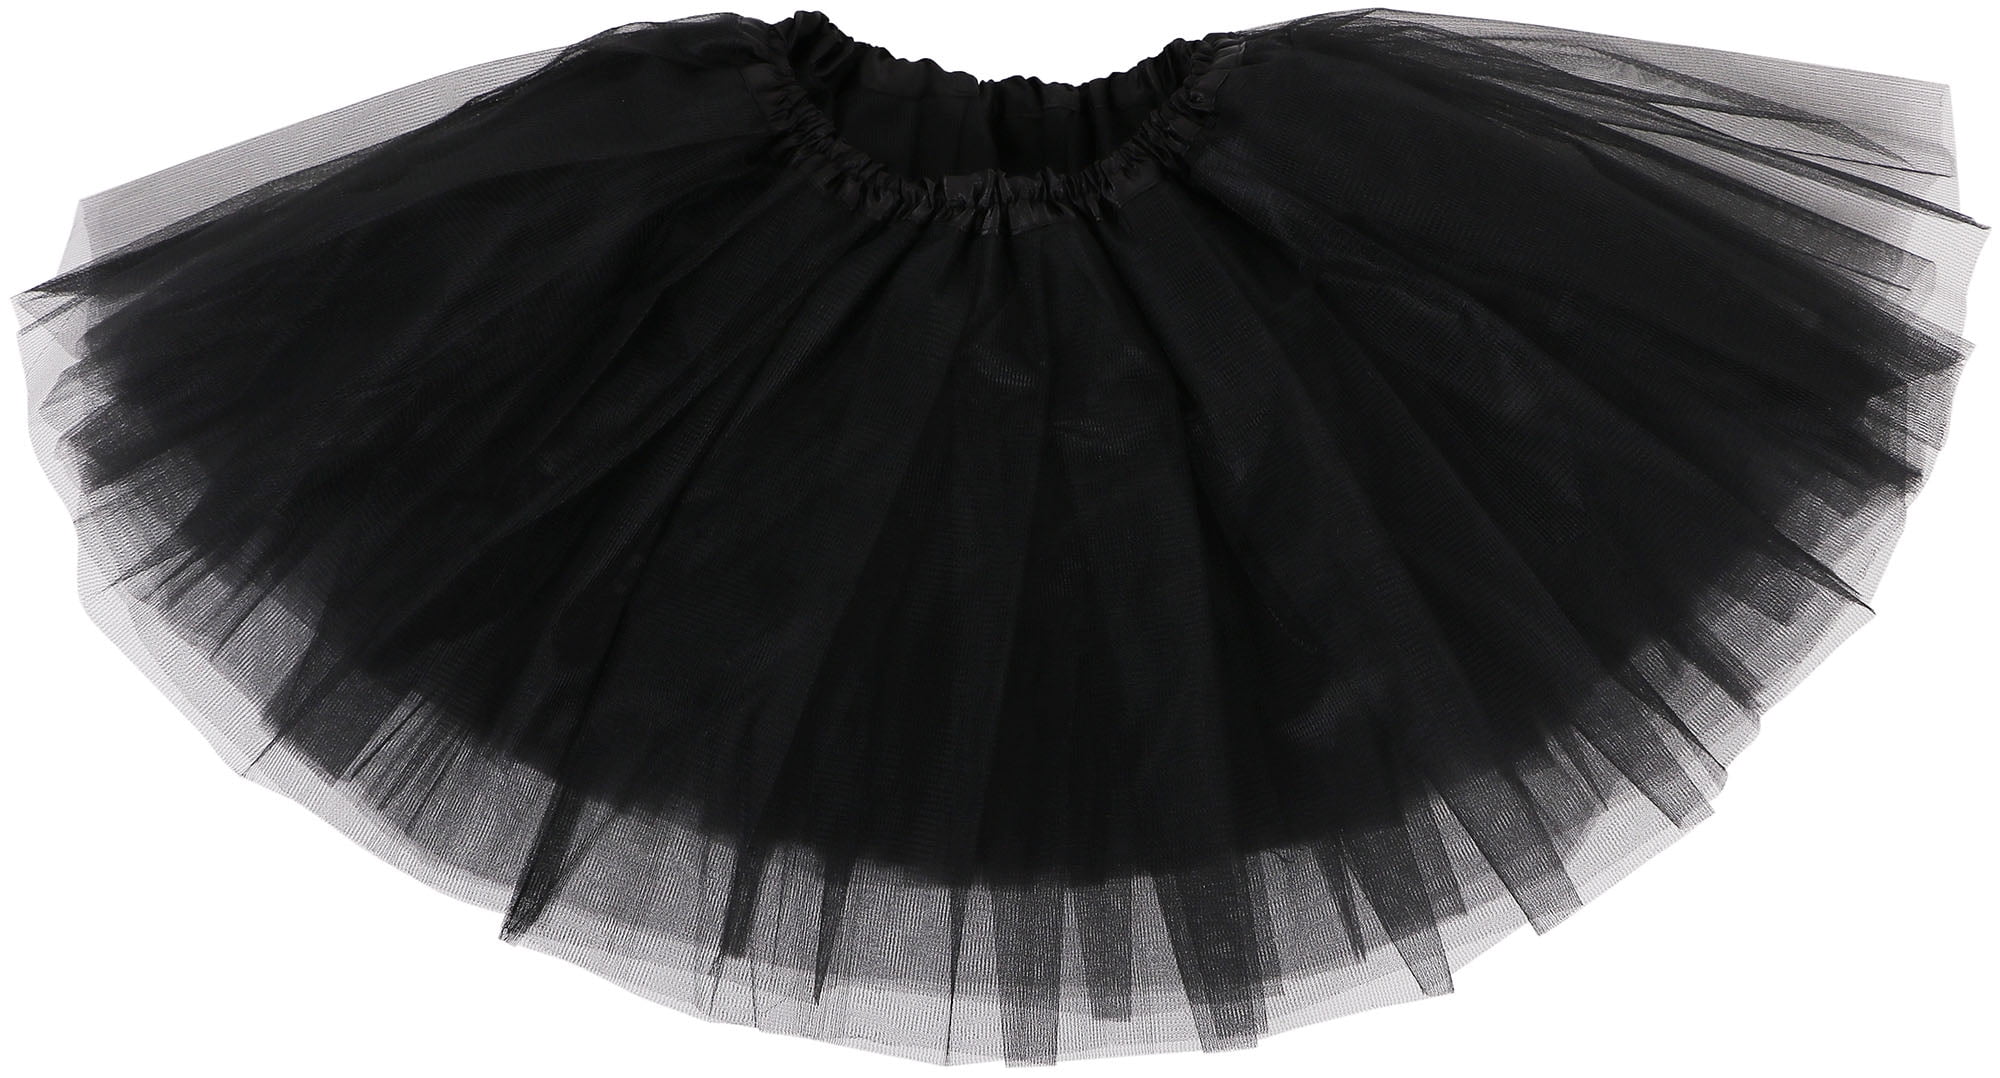 Blue Amosfun Kids Layered Tutu Skirt Girls Dotted Sequin Dance Ballet Dress Up Tulle Skirt for Party Banquet Carnival Costumes